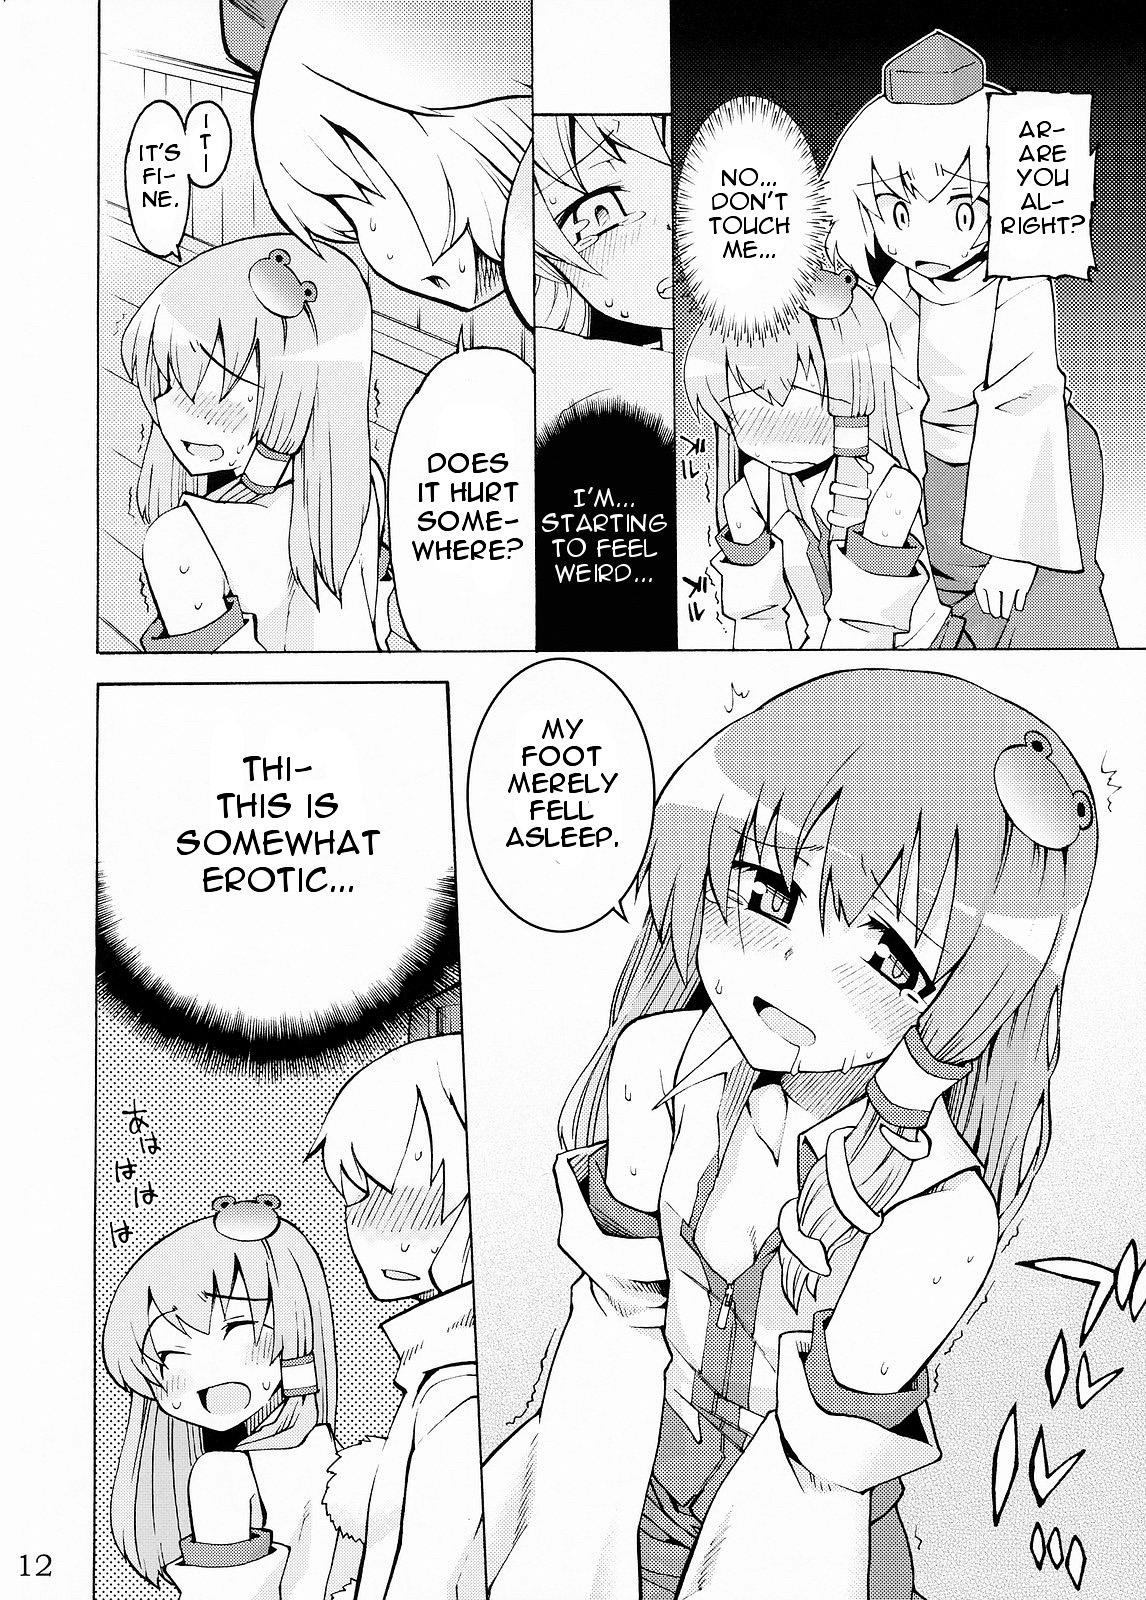 Outdoor Kami-sama to Issho! Happy every day! - Touhou project Assfucked - Page 12